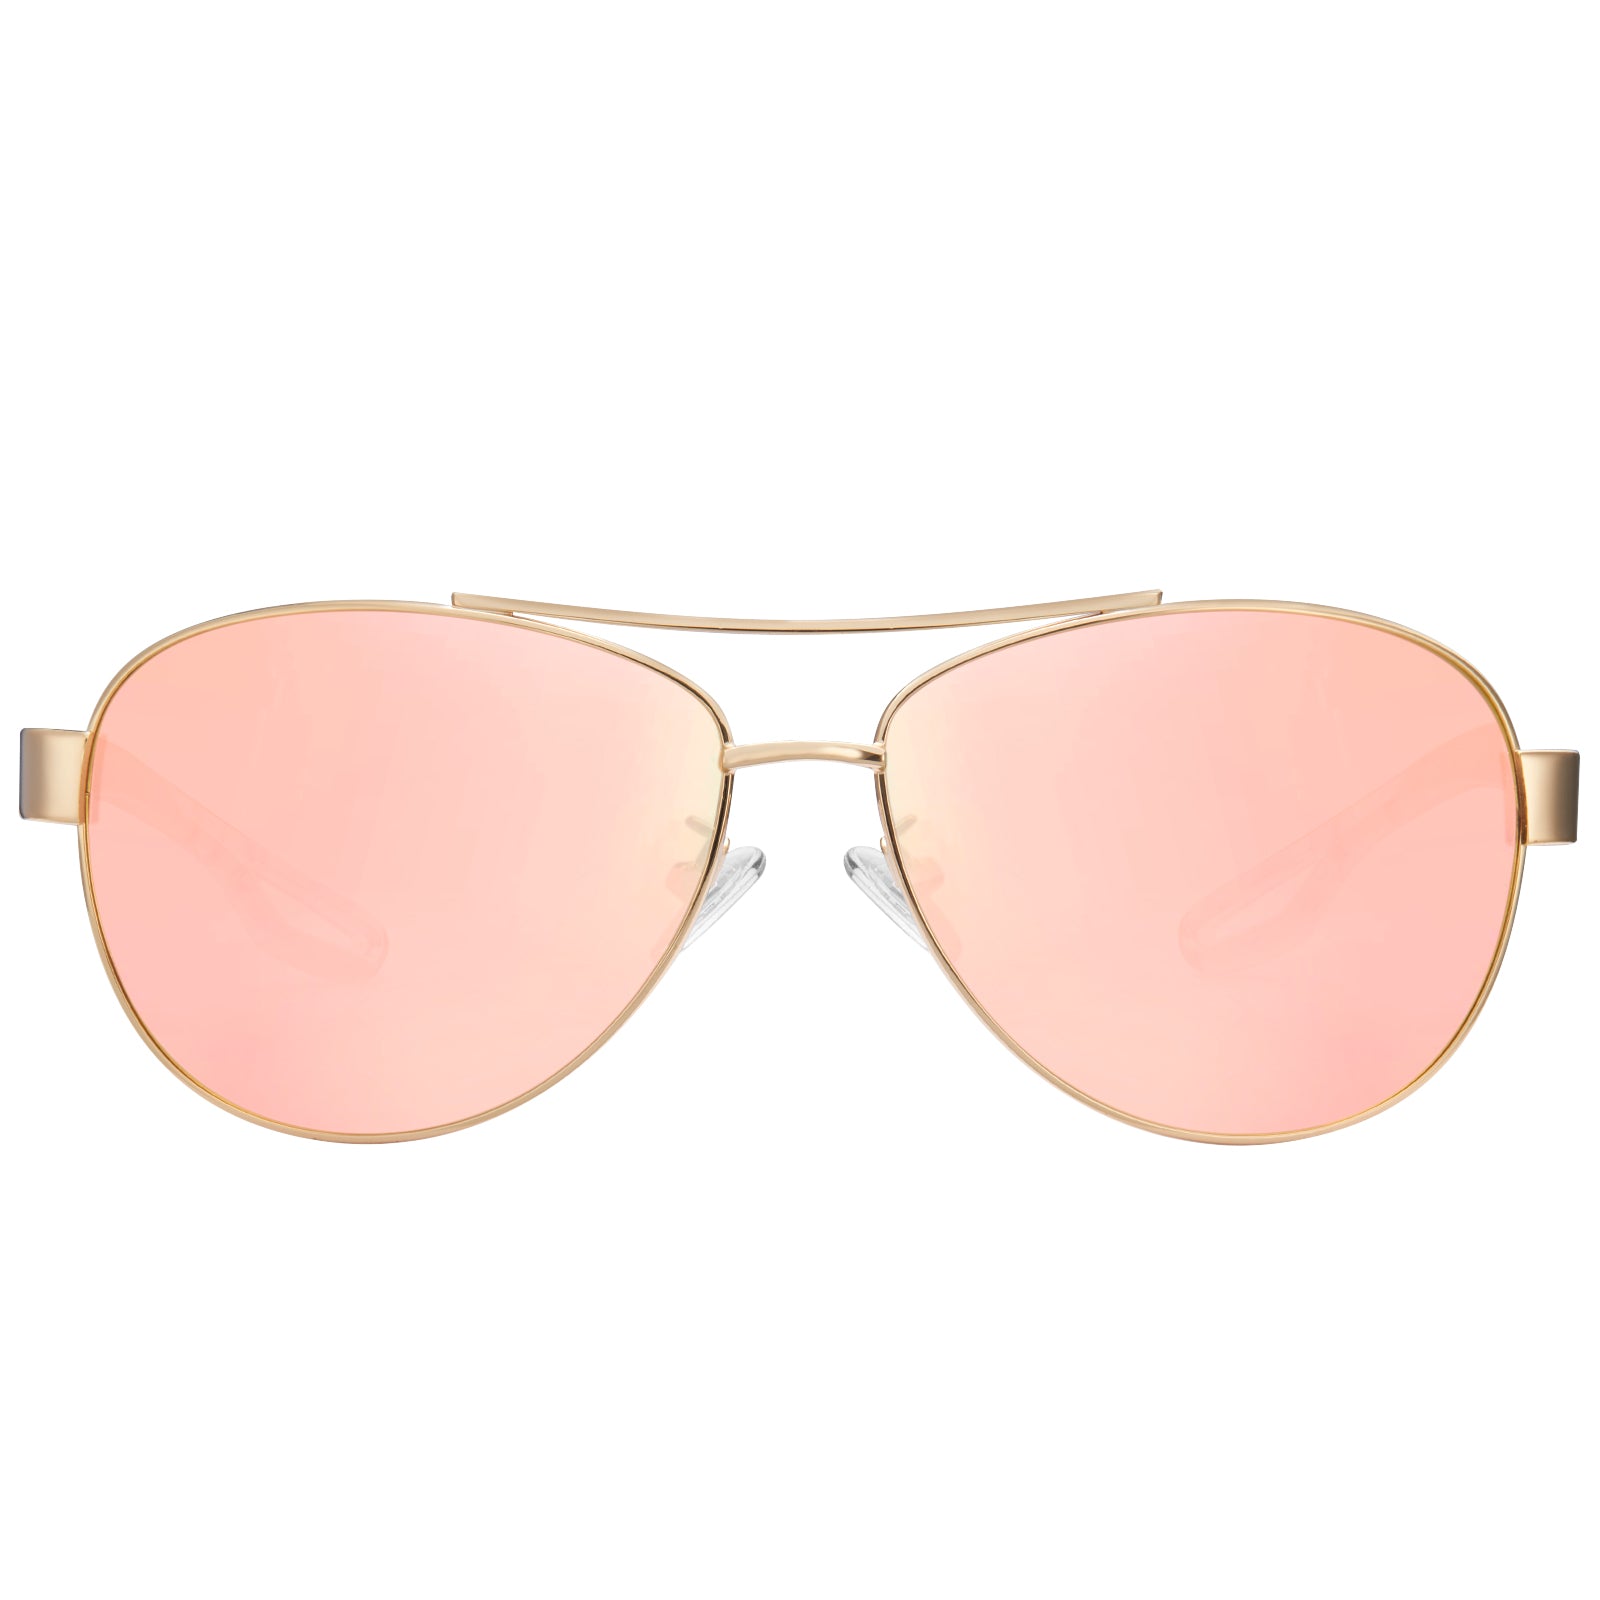 Tiamo -  Bright Gold Frame with Green Lenses